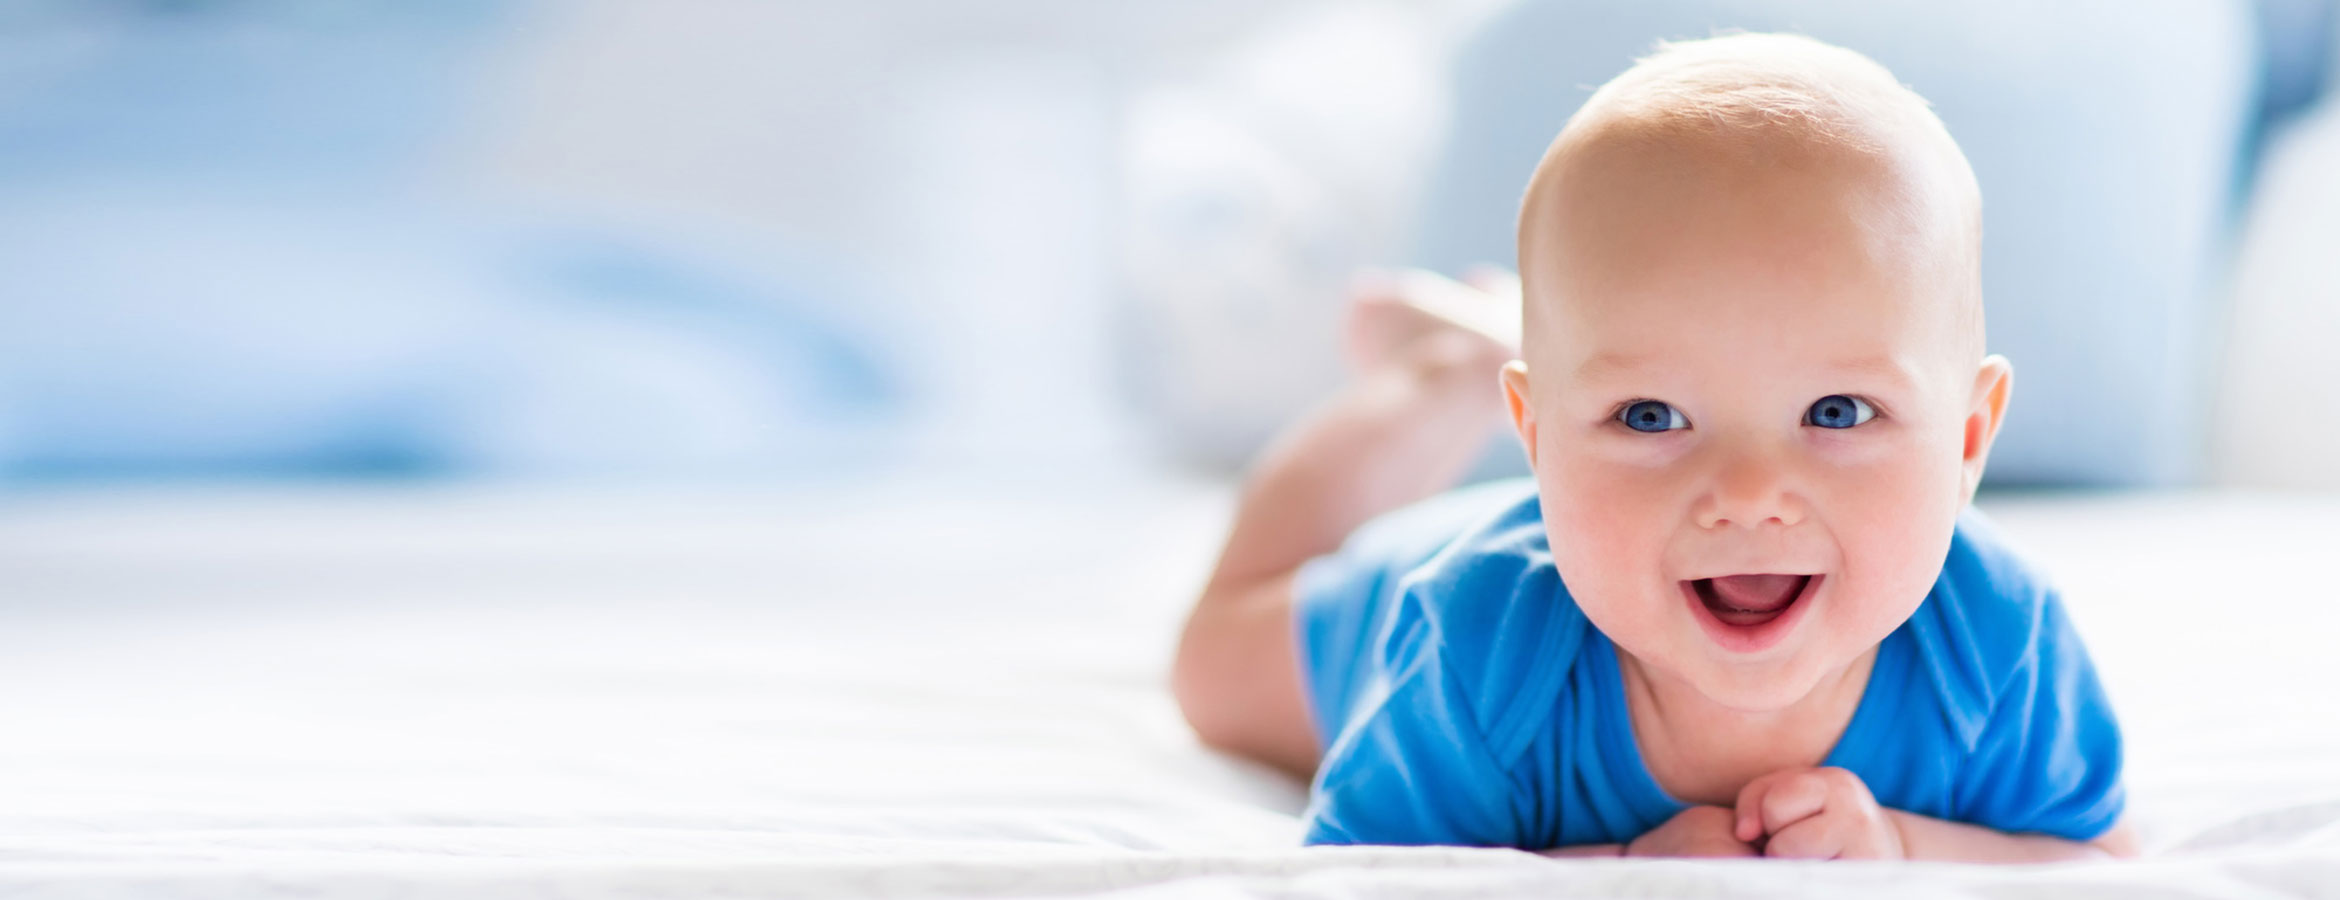 Educate Yourself about IVF success rates | slideshow - baby in blue outfit